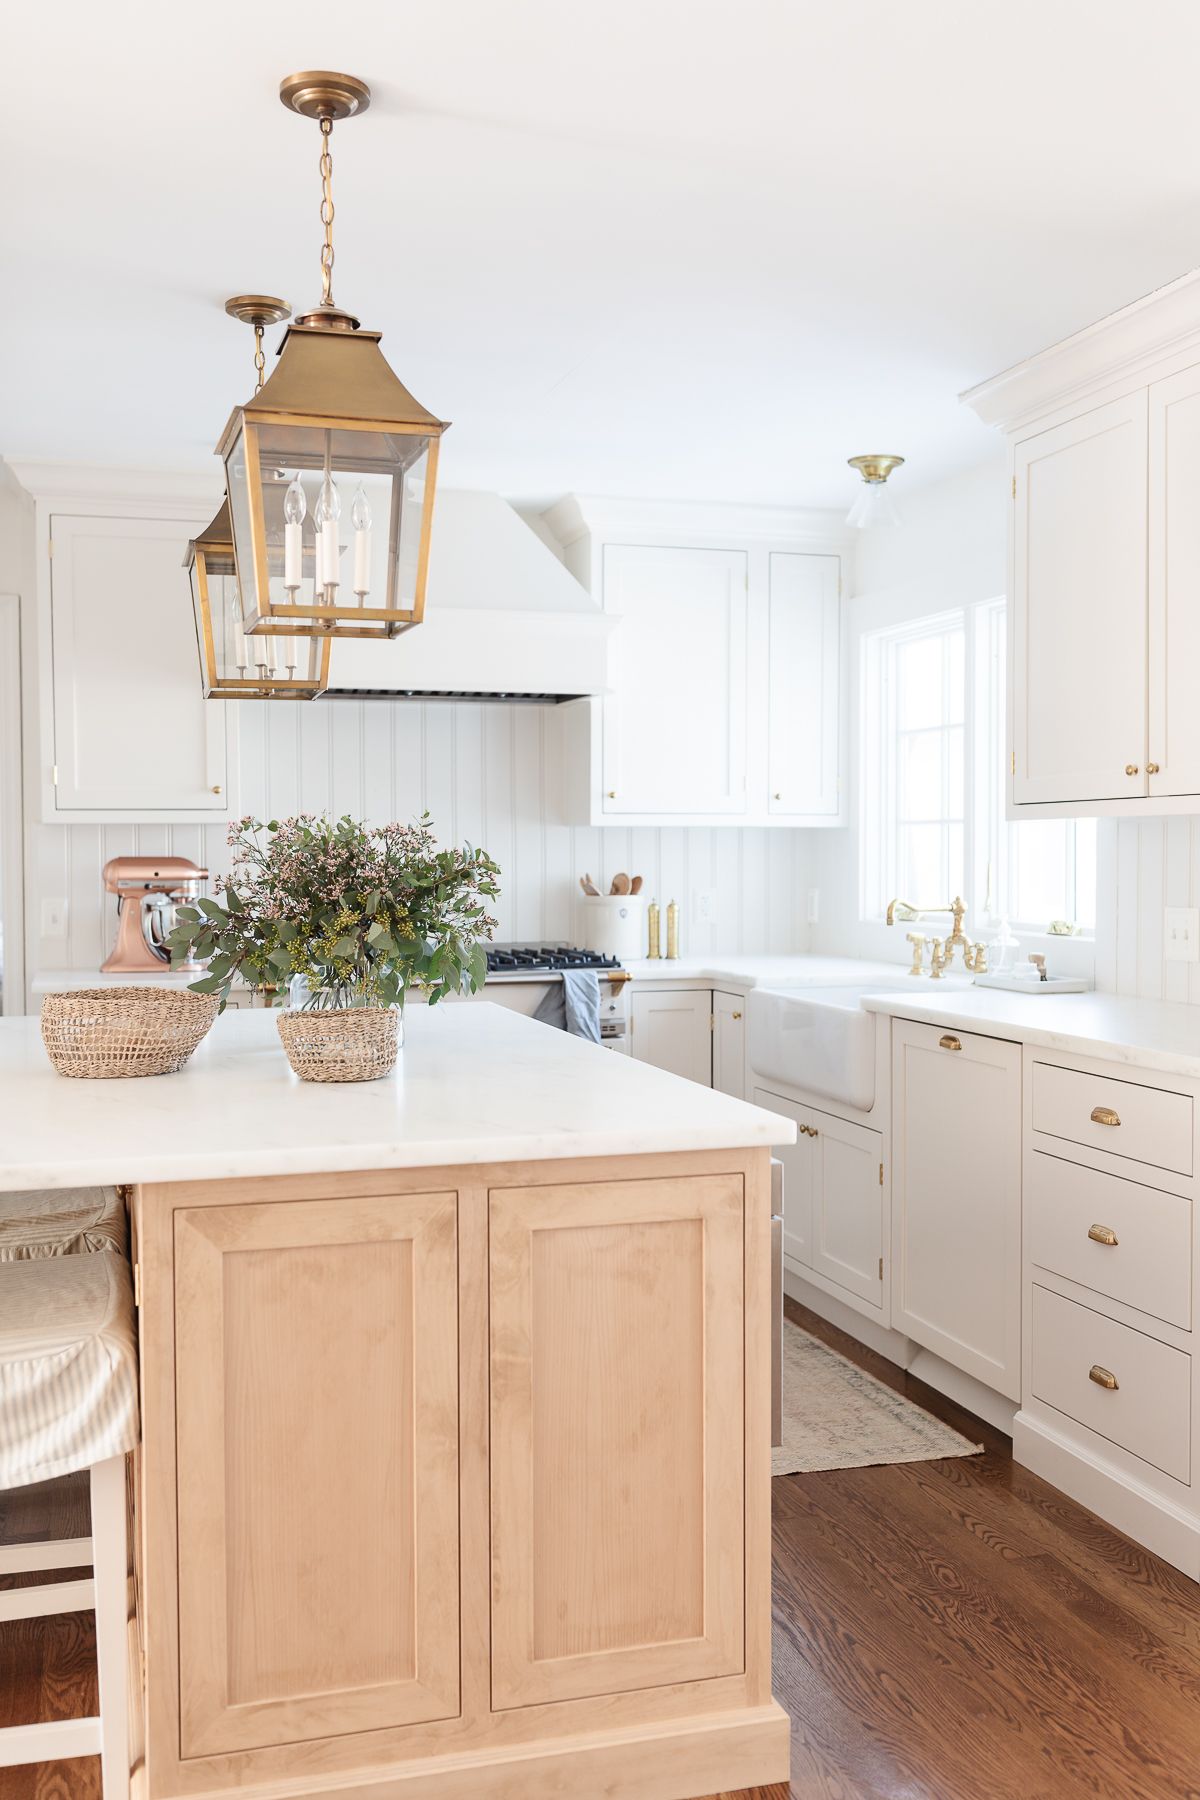 A cream kitchen with cabinets, walls and trim painted the same color. 